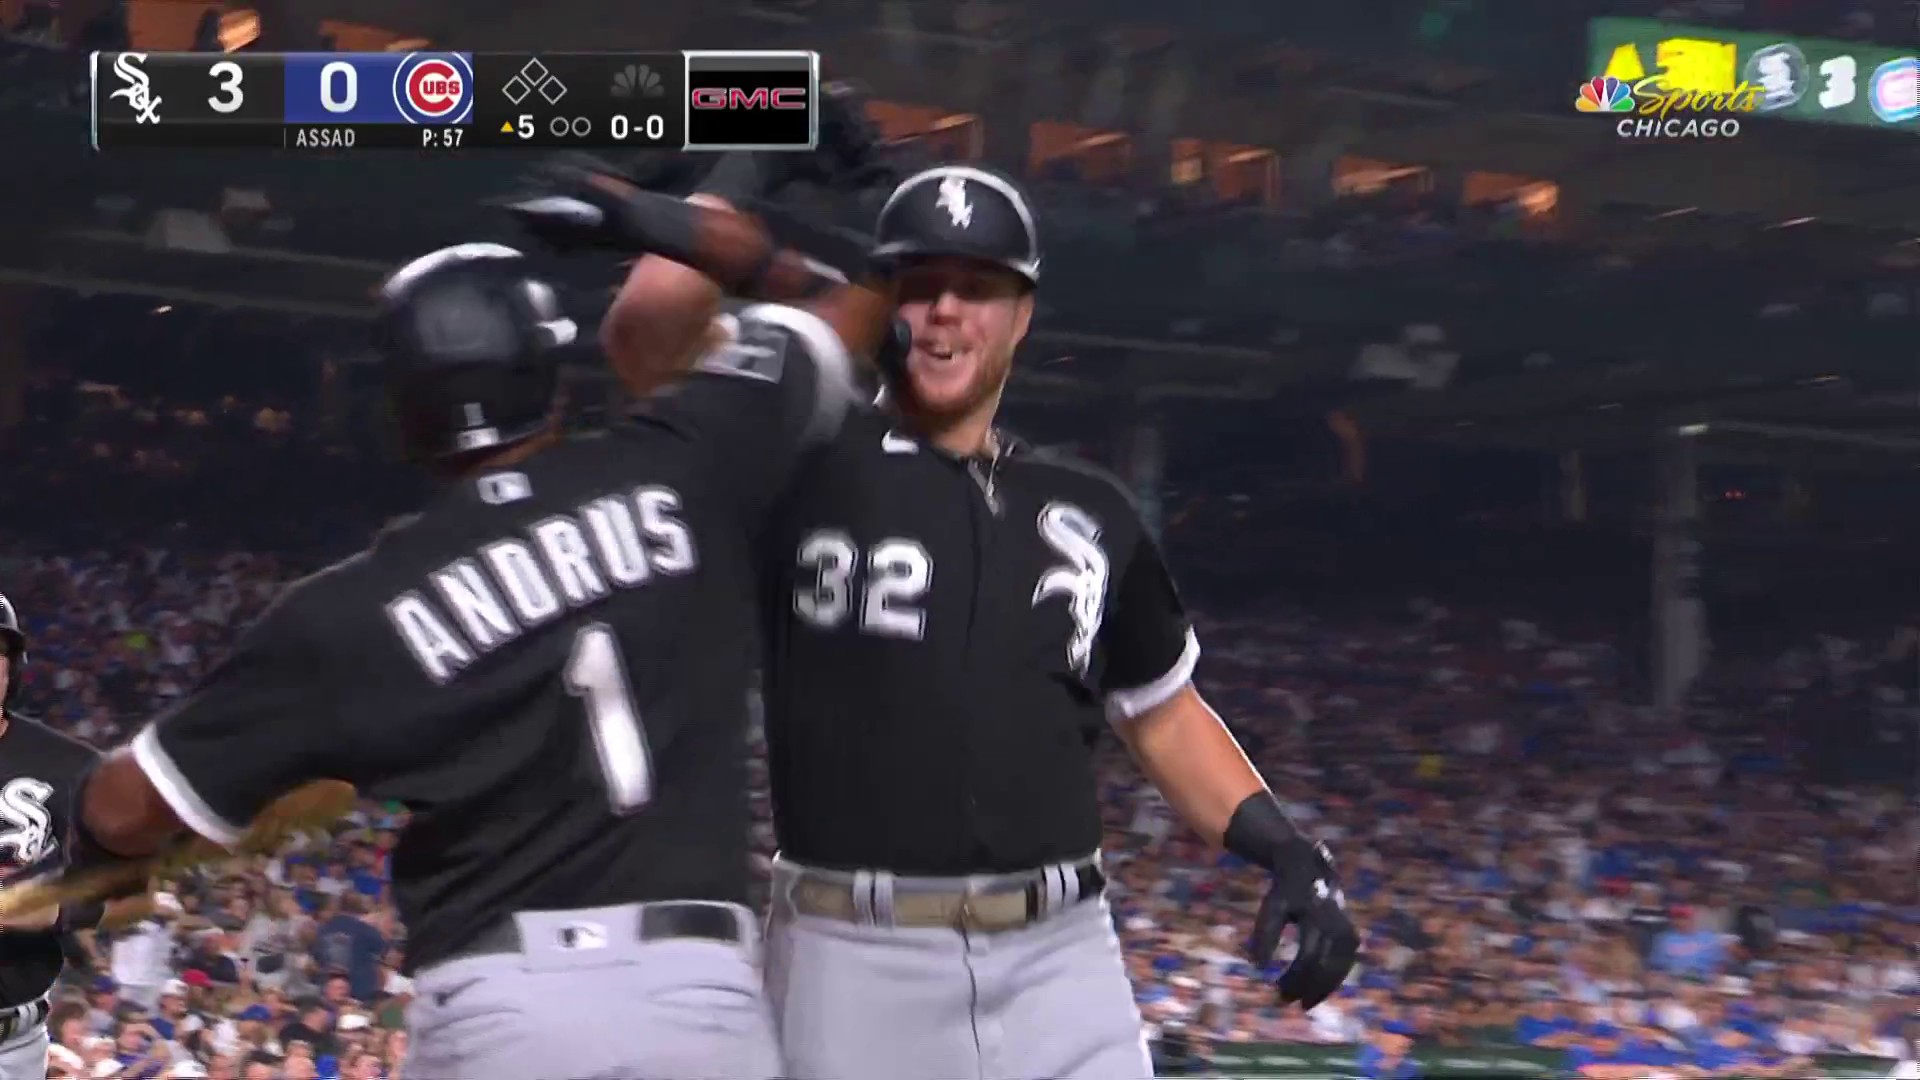 WATCH: Christopher Morel hits walk-off home run, Cubs take down White Sox  4-3 – NBC Sports Chicago